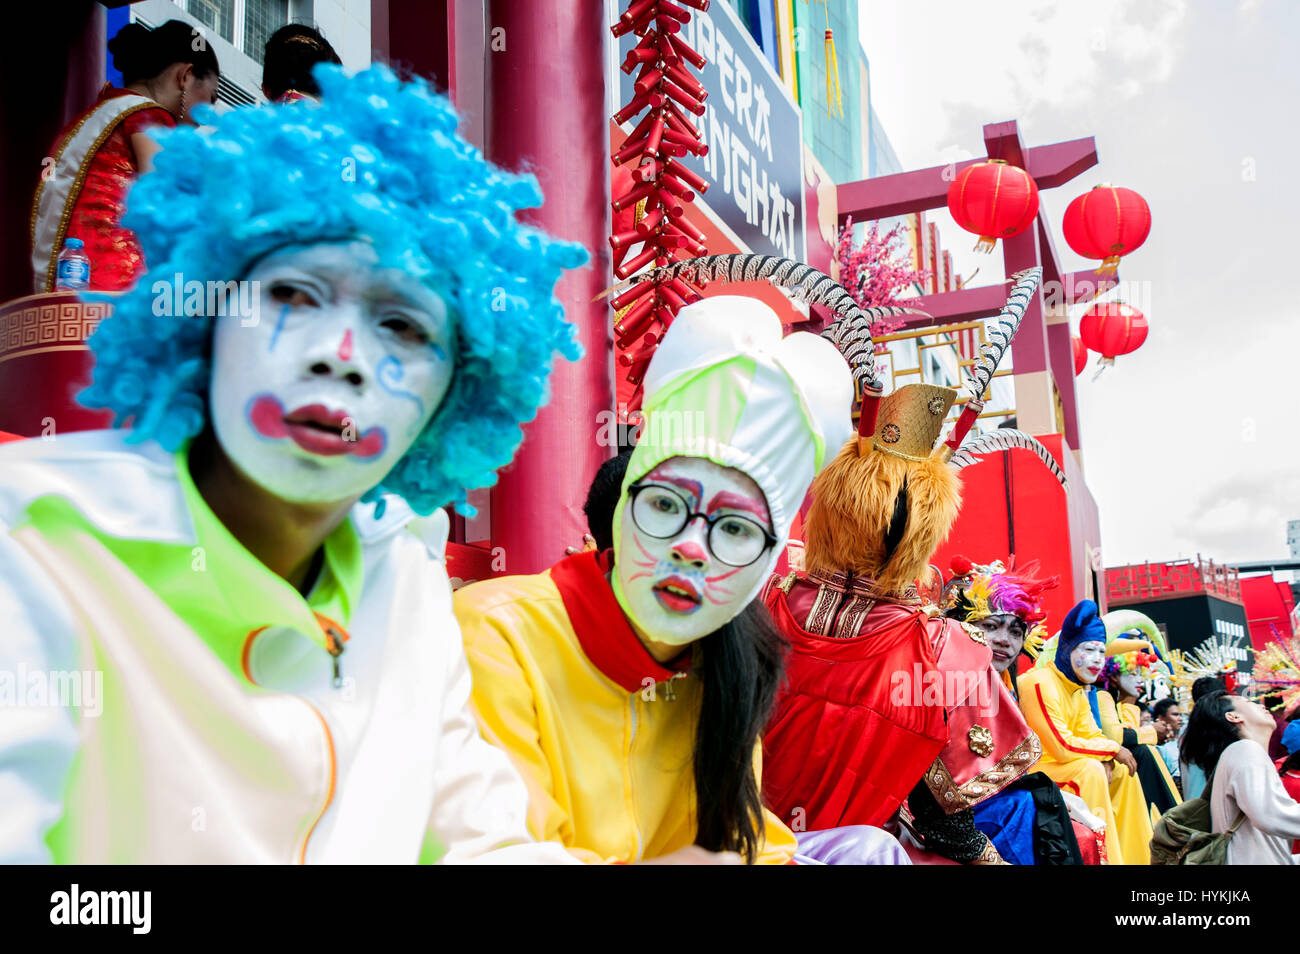 JAKARTA, INDONESIA - FEBRUARY 21: People wearing unique costumes during